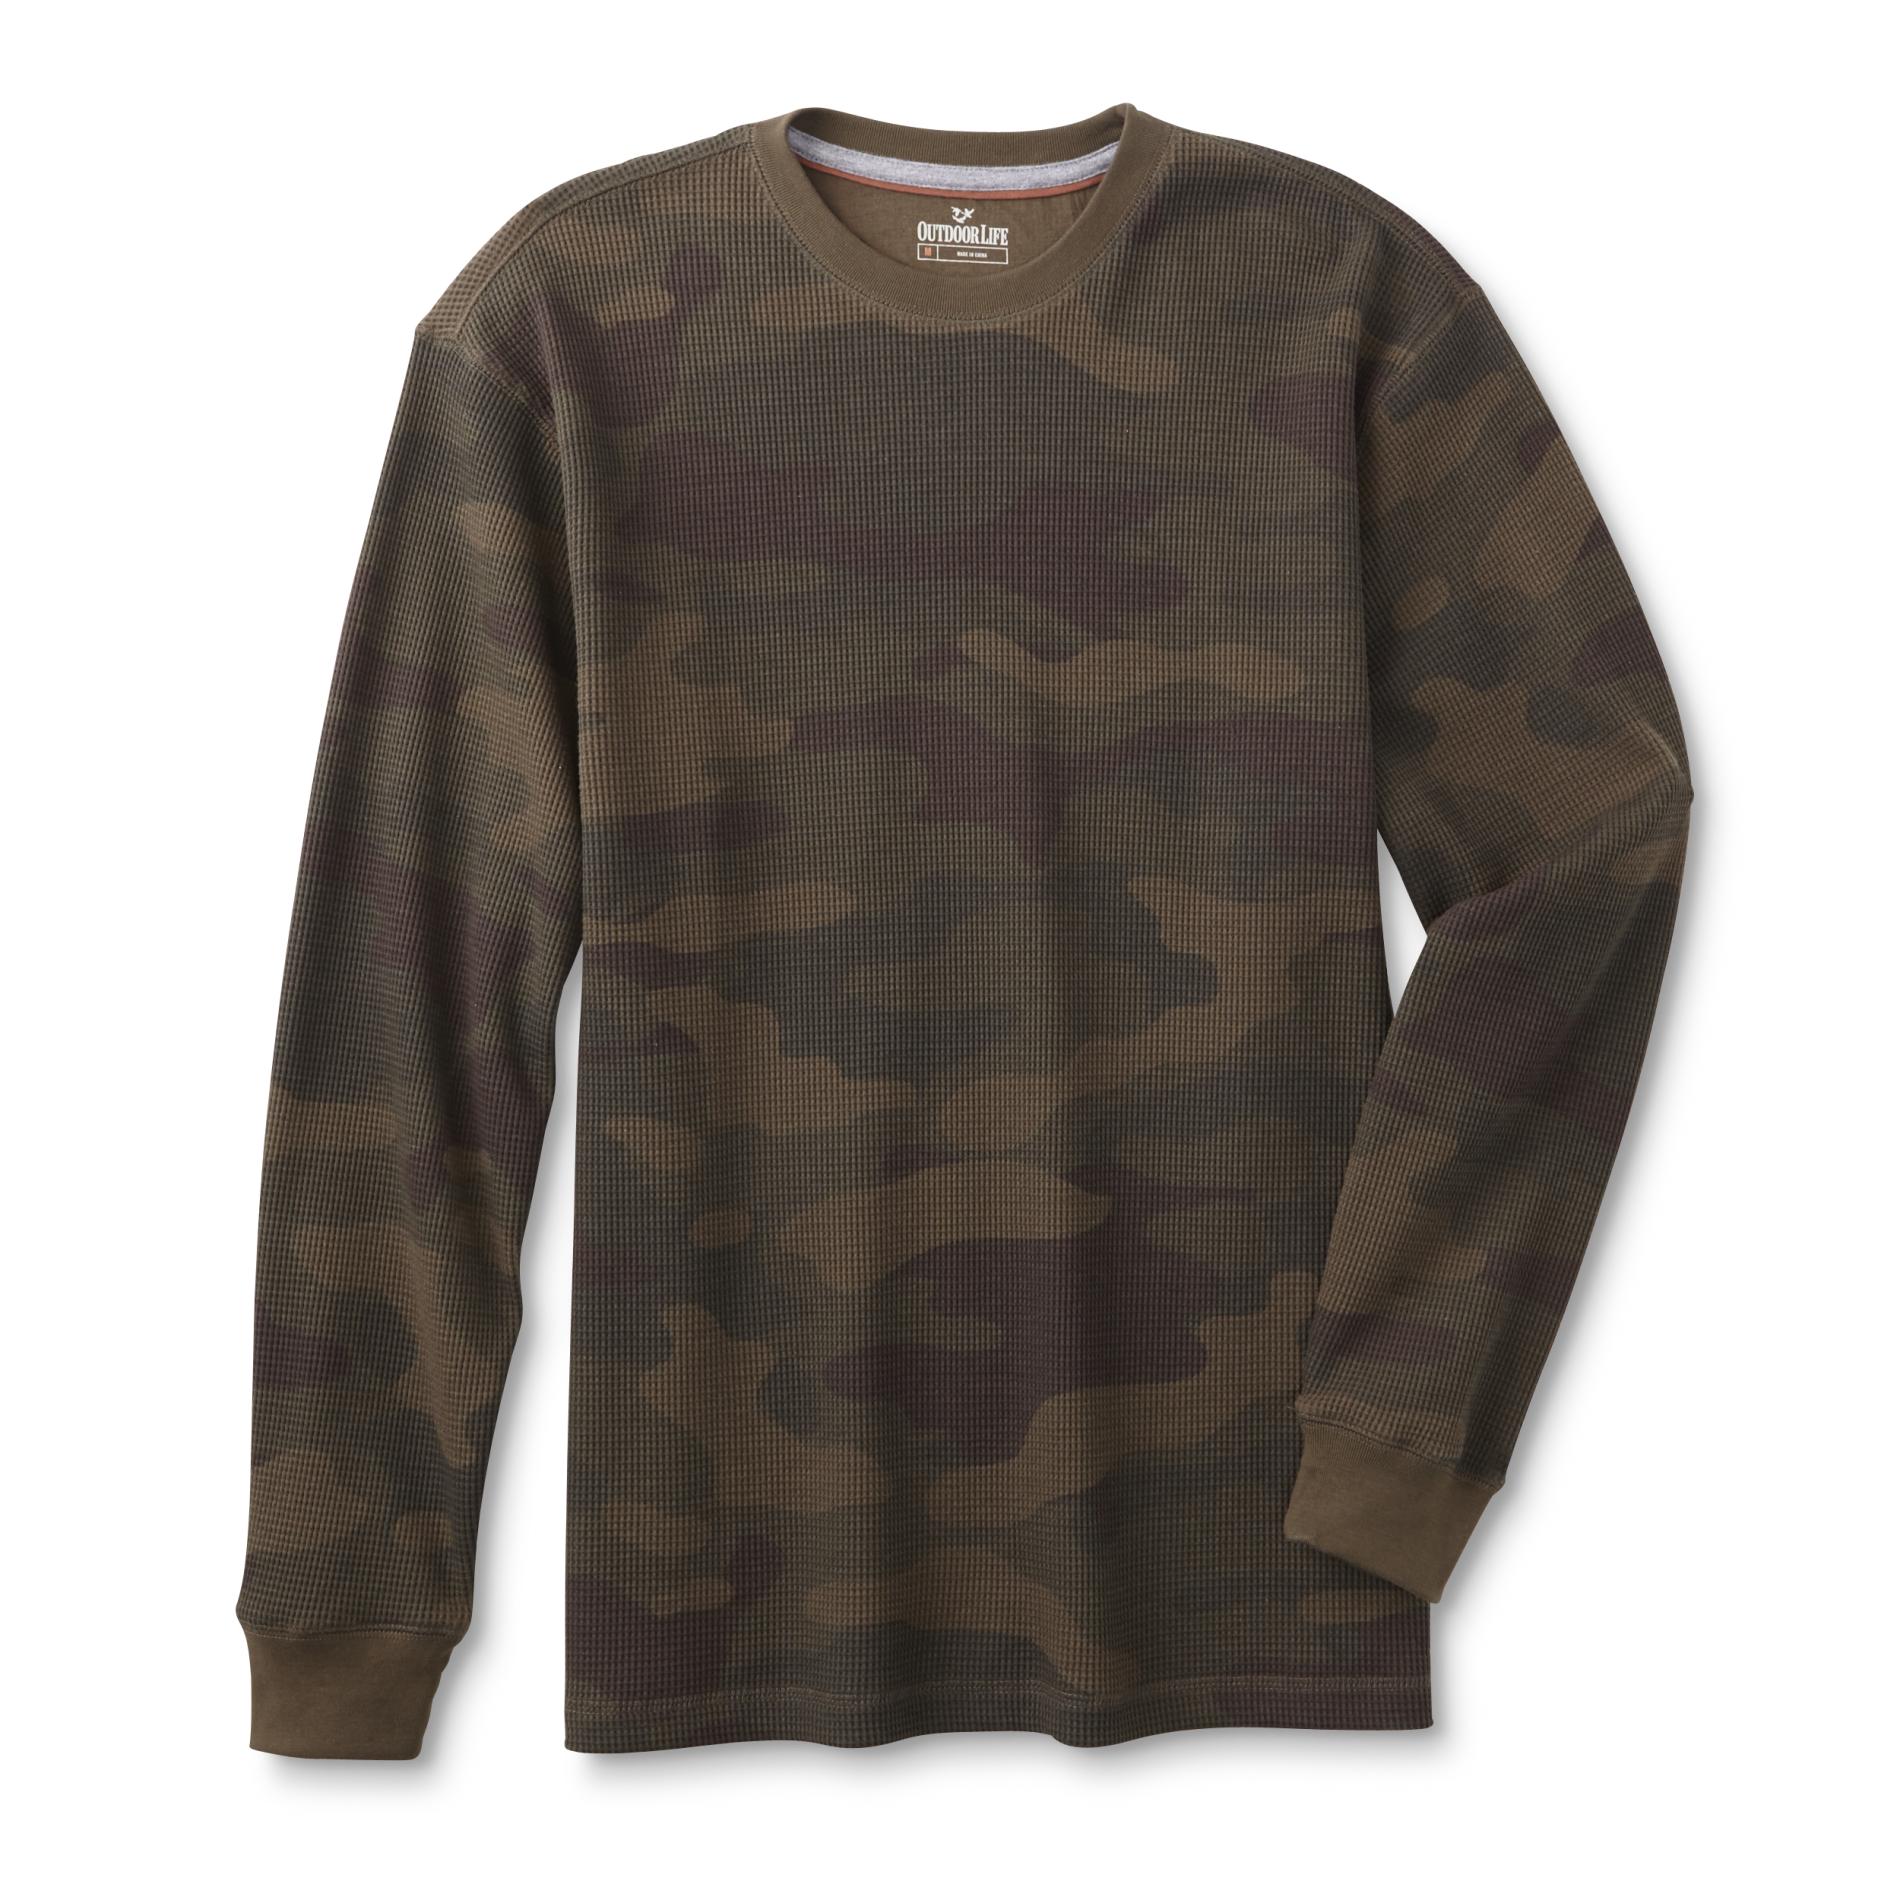 Outdoor Life Men's Big & Tall Thermal Shirt - Camouflage